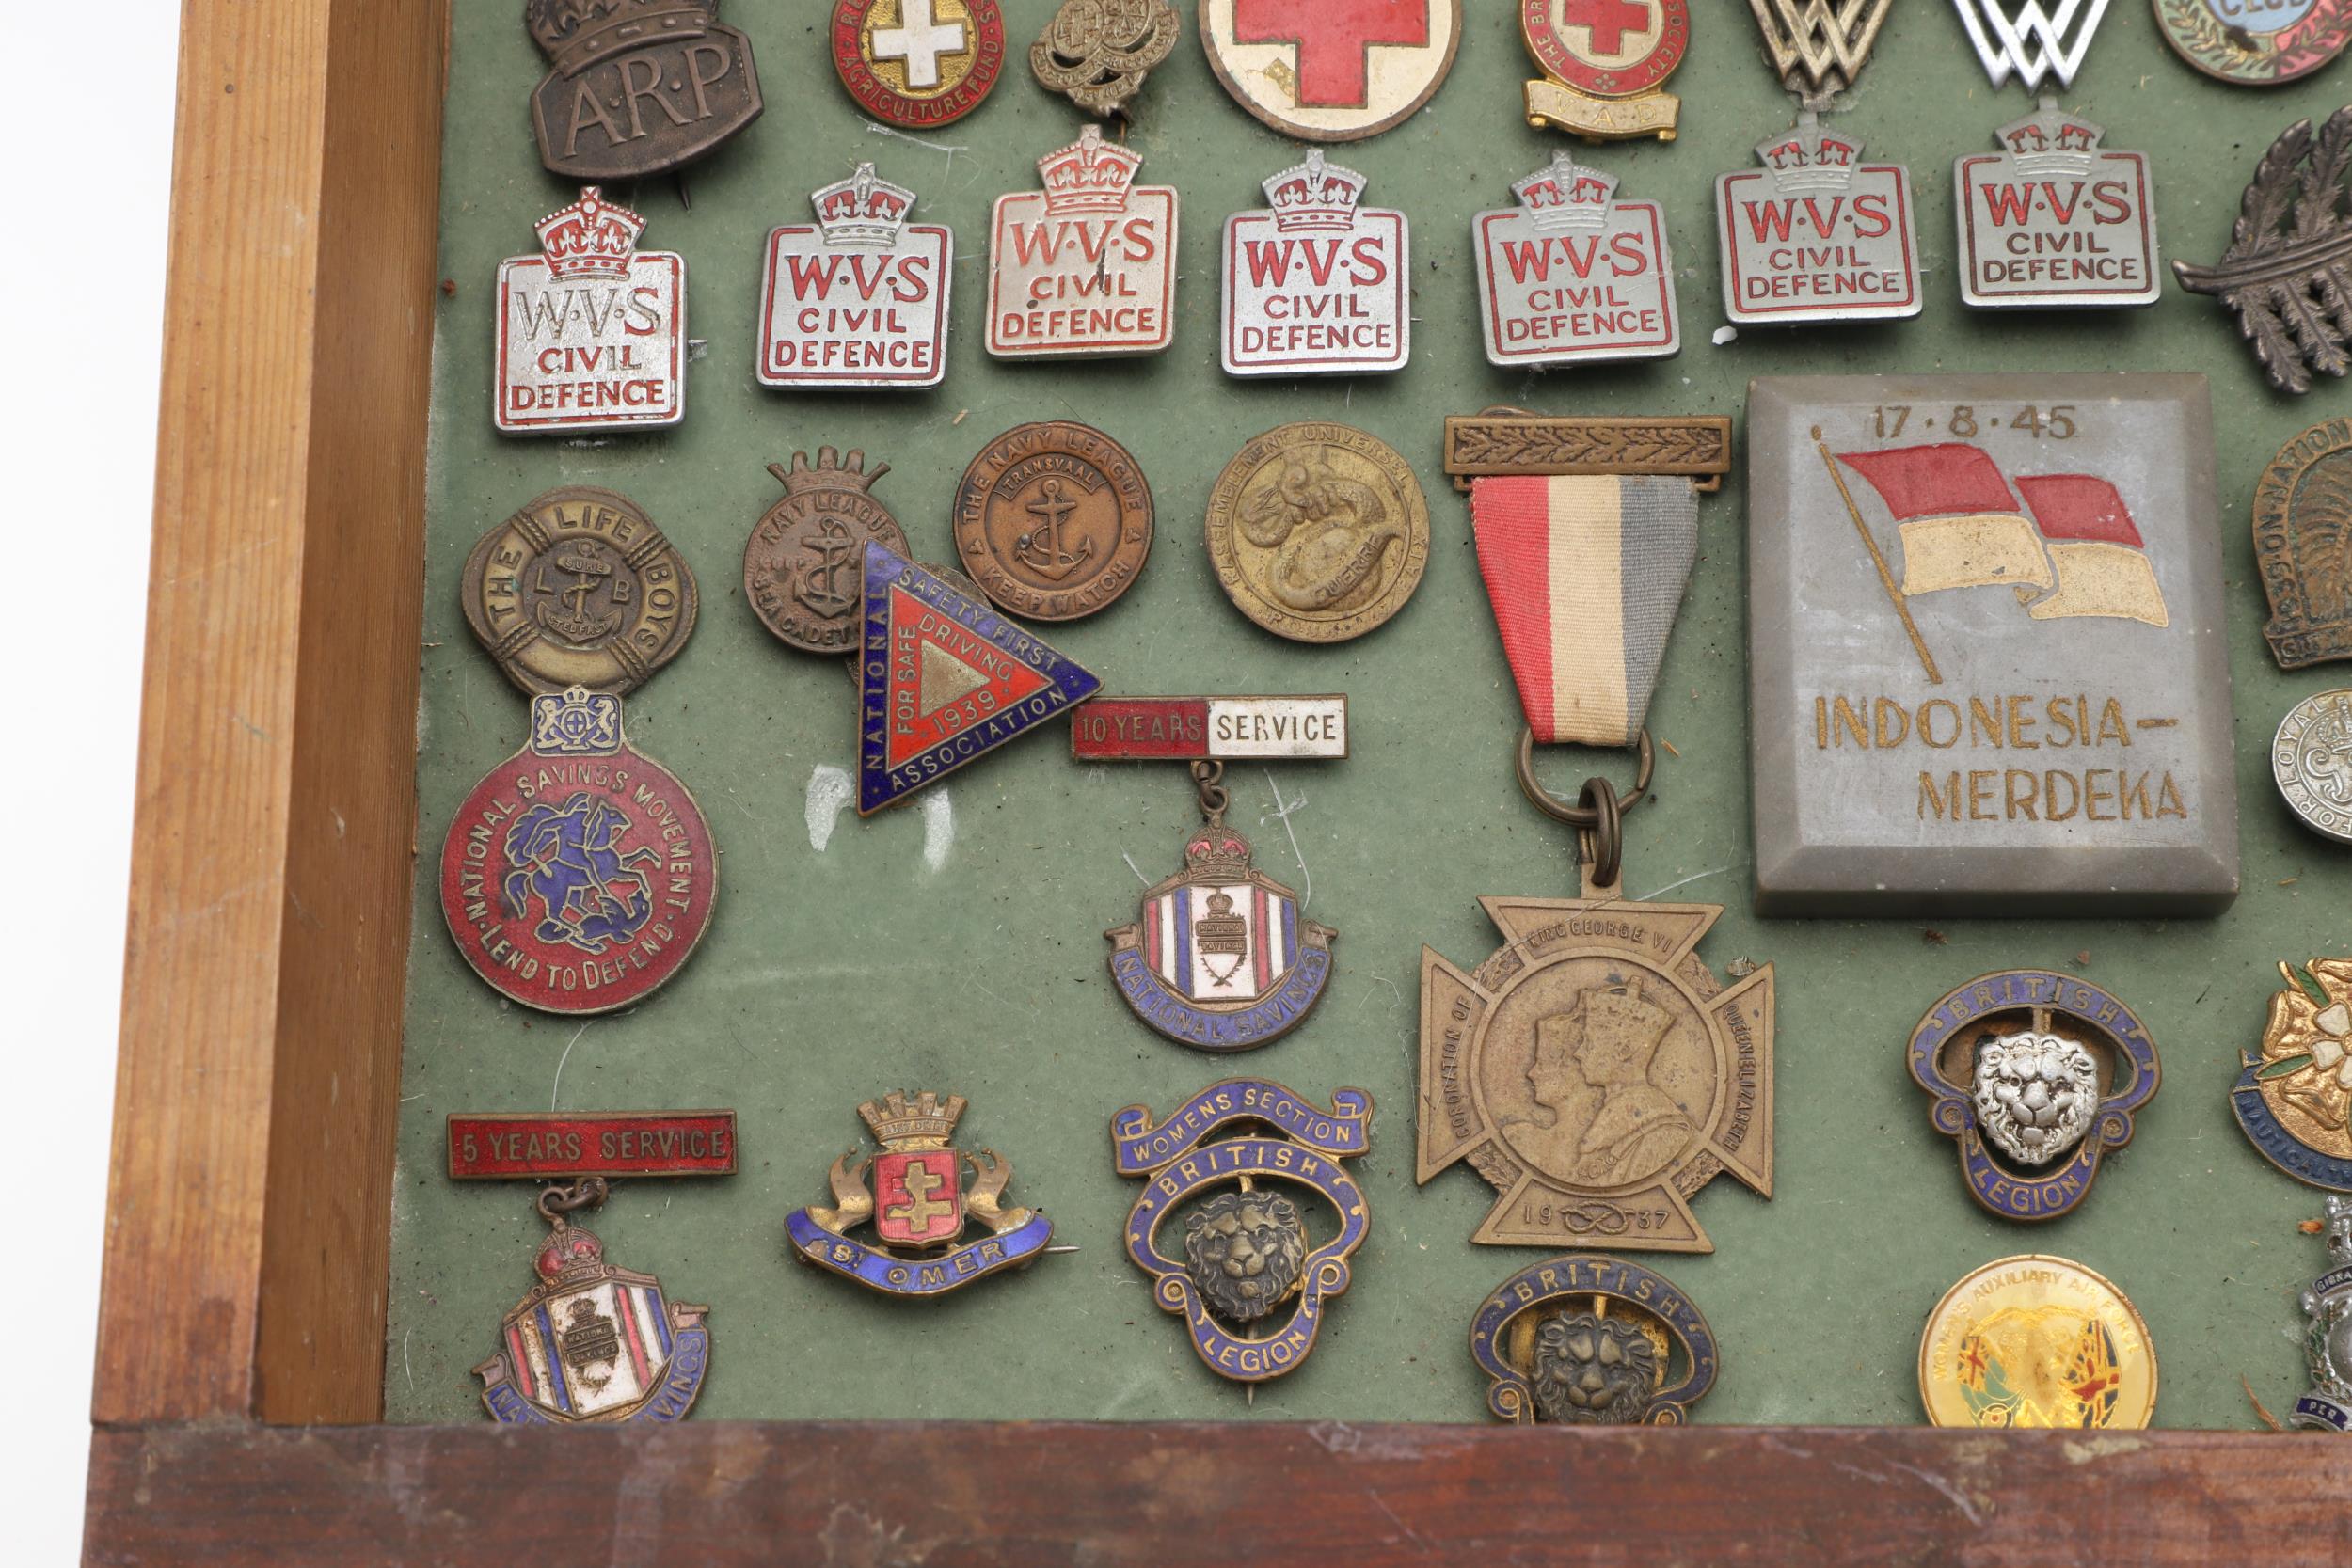 AN INTERESTING COLLECTION OF MILITARY RELATED ENAMEL AND SIMILAR BADGES. - Image 6 of 7